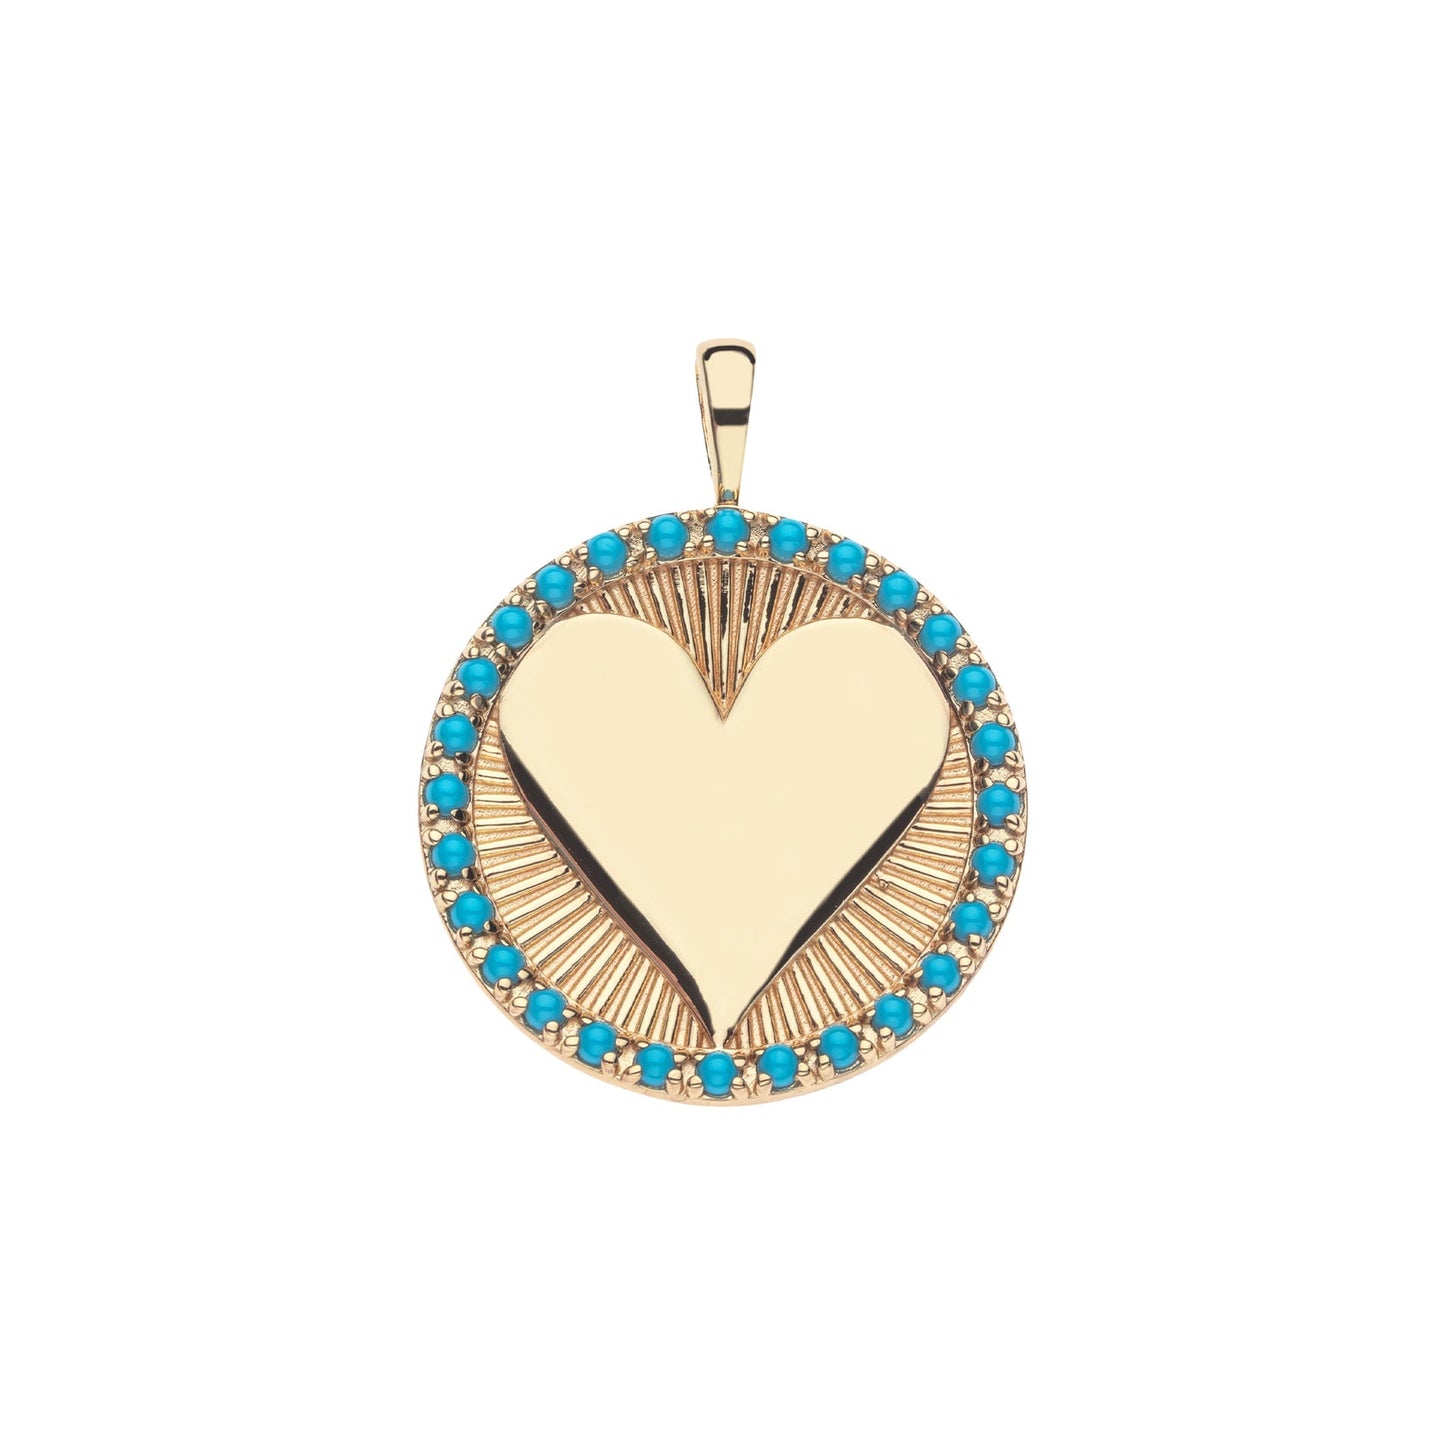 Jane Win - LOVE Embellished Hearts Find Me in Turquoise